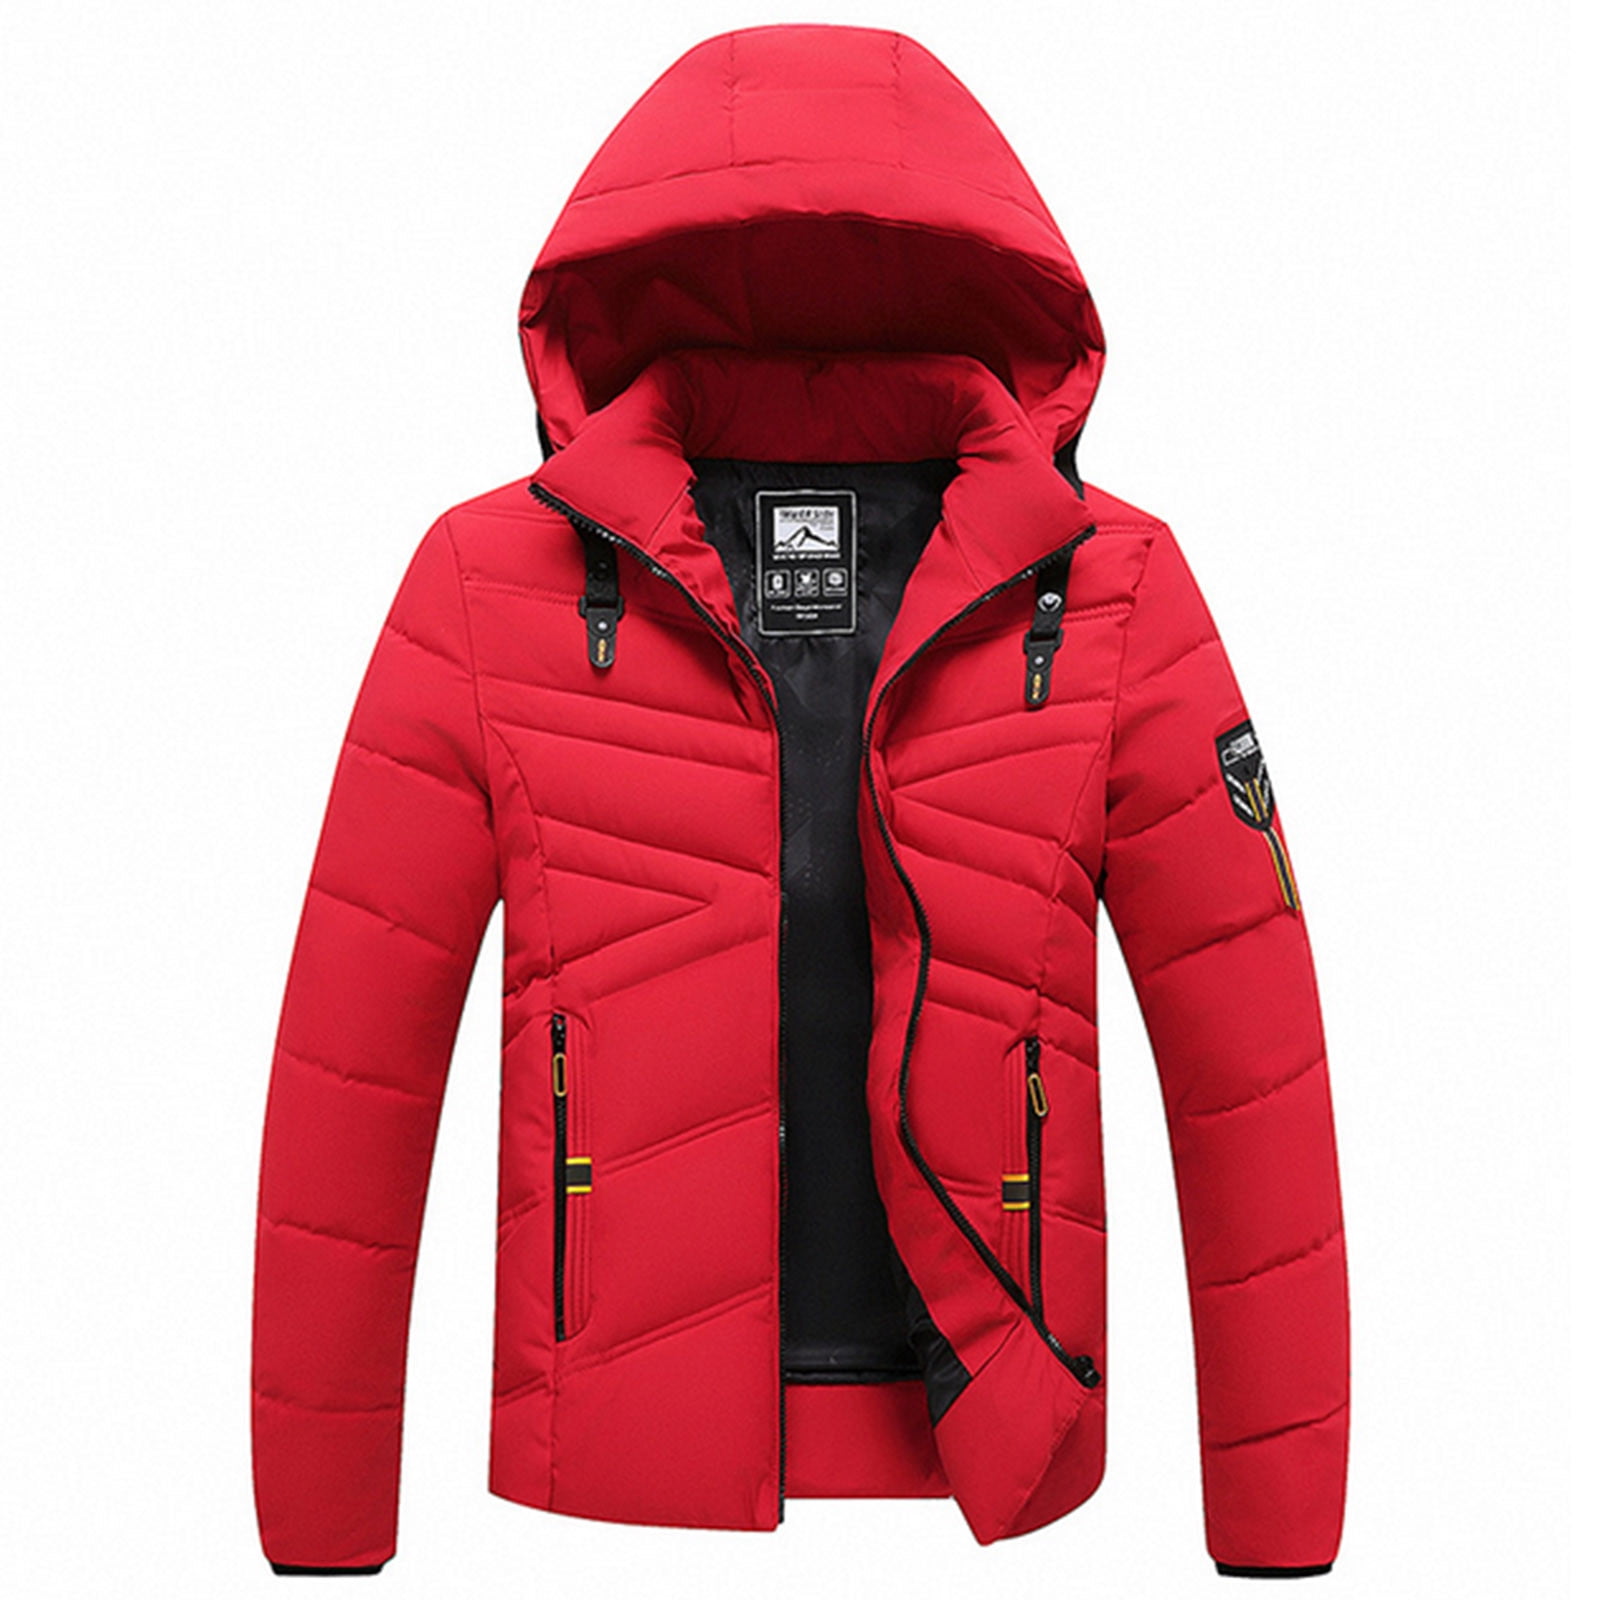 KettyMore Men Awesome Padded Pattern Solid Color Hood Neck Warm Jacket